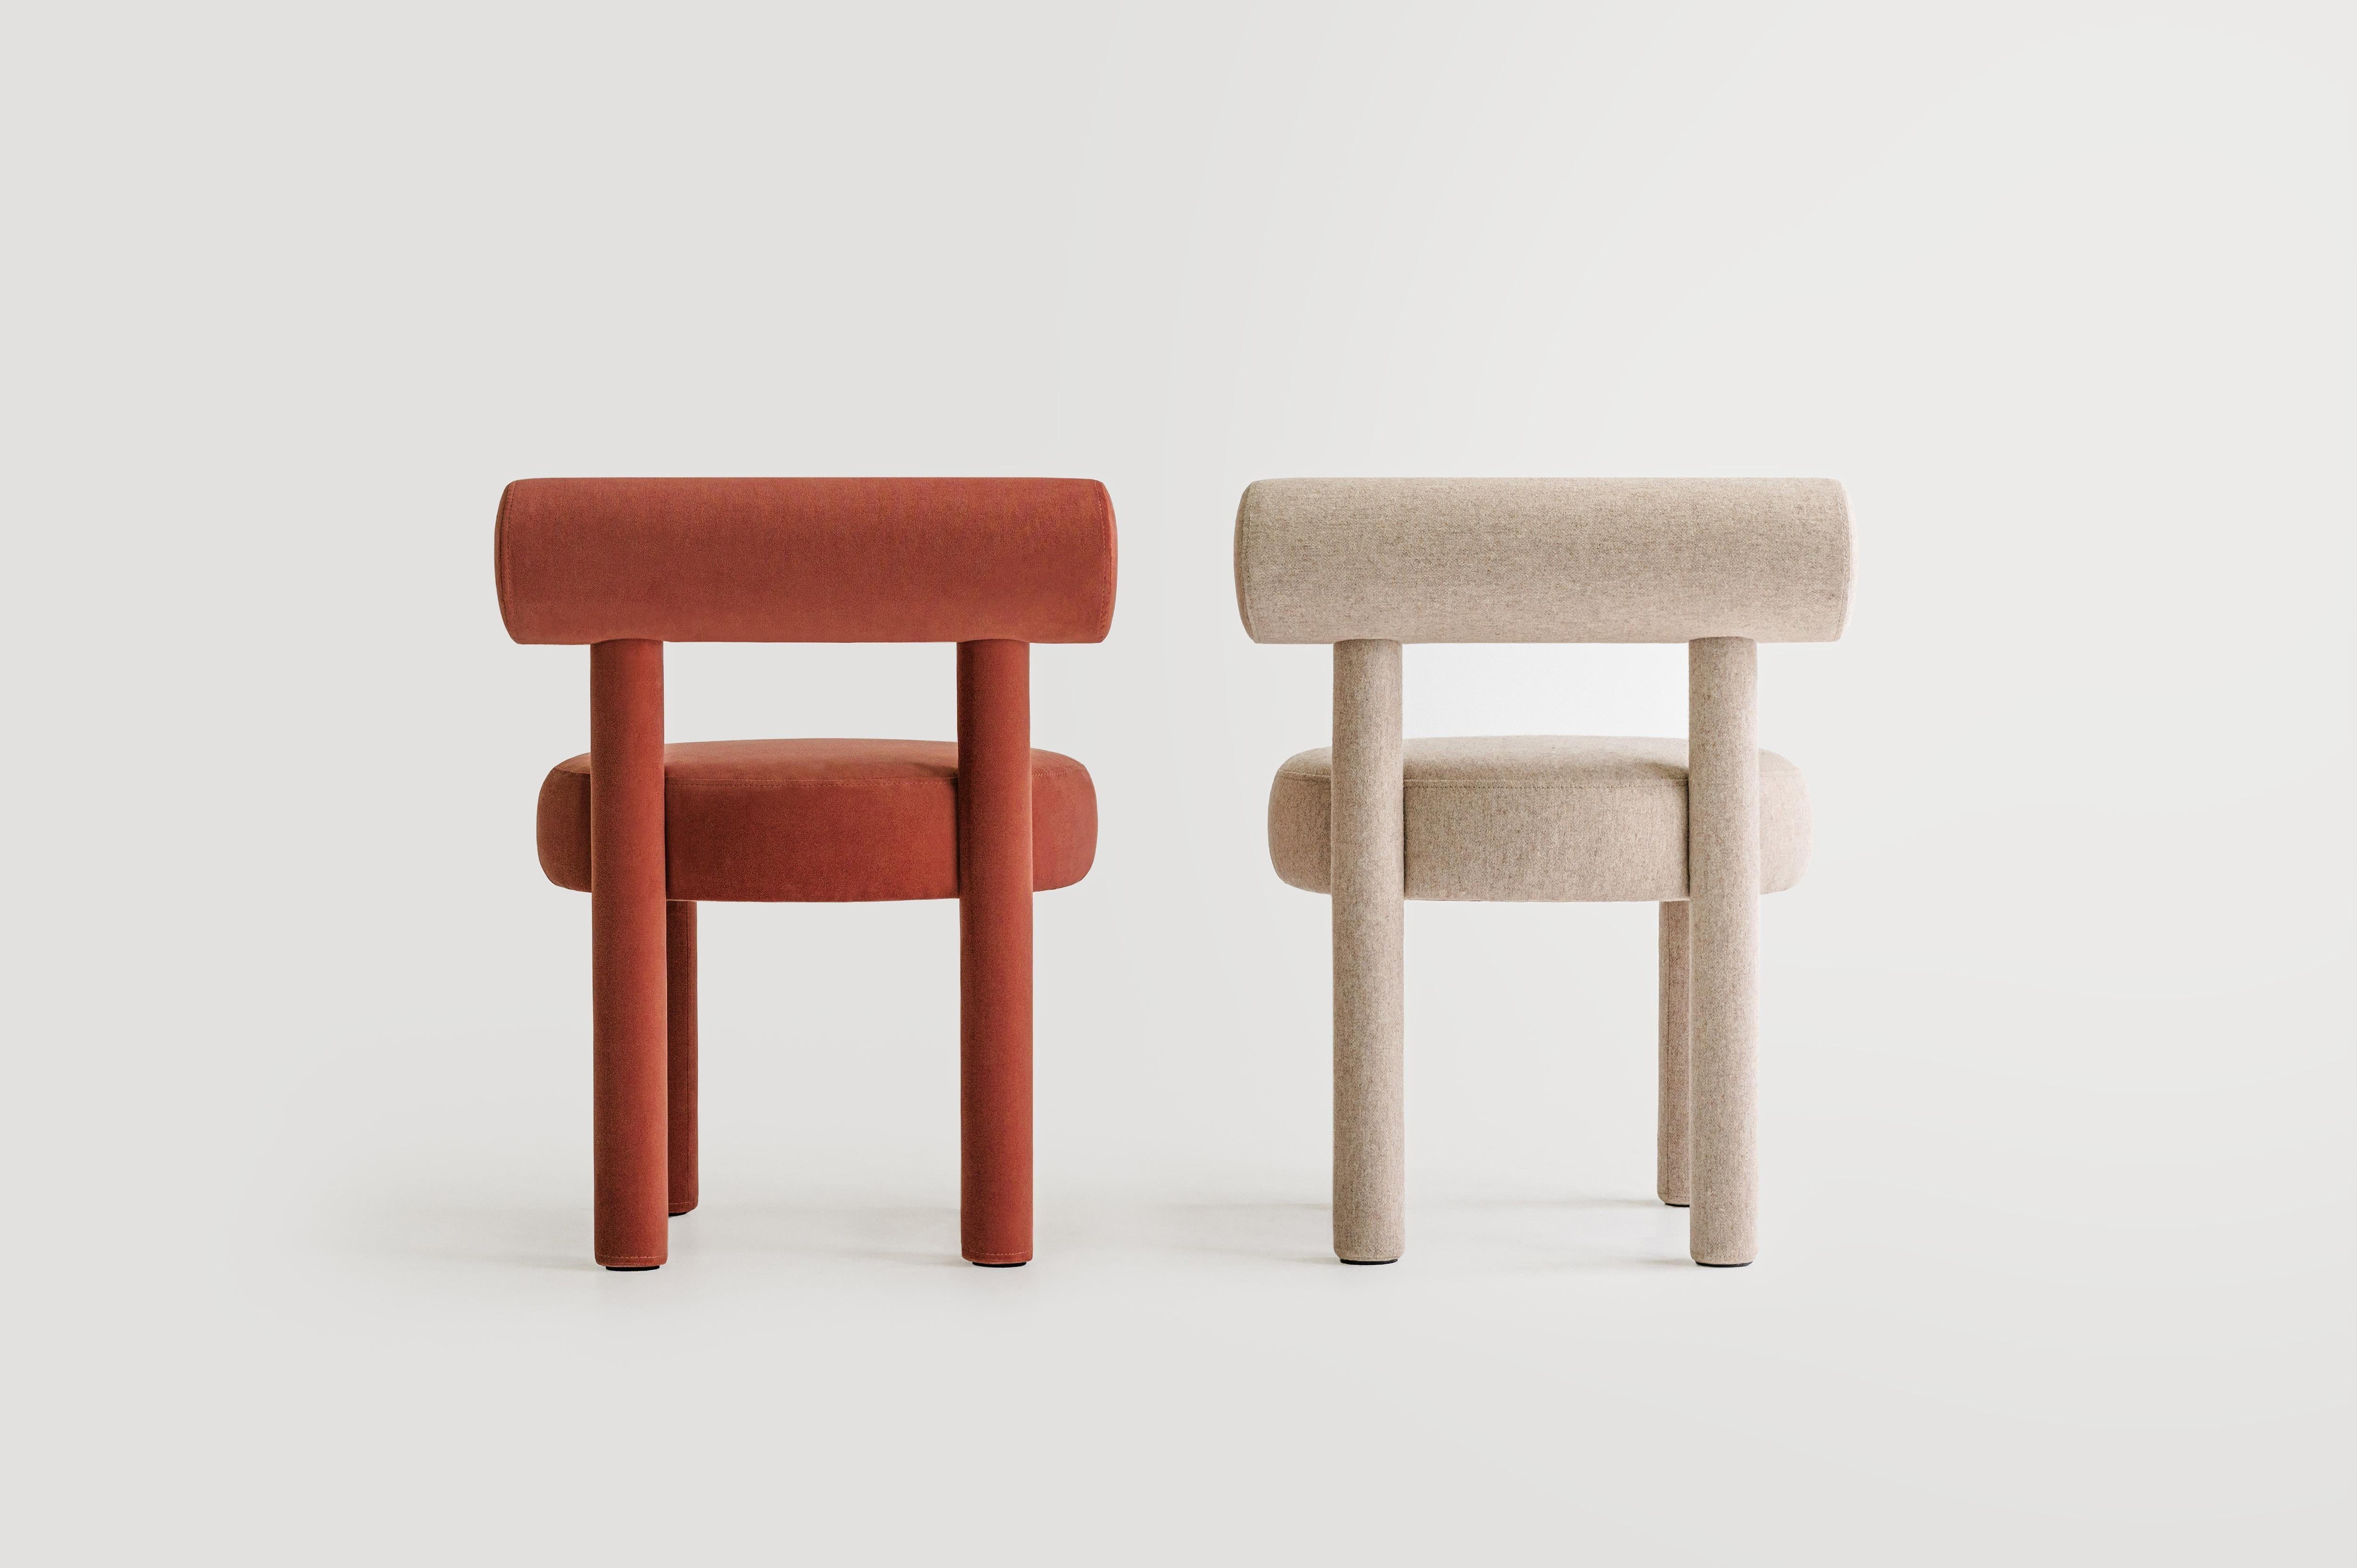 Set of 2 Dining chair 

Dining chair Dark orange : Velvet 
Dining chair Beige : Wool 

Designer: Kateryna Sokolova
Materials: wood, plywood, foam rubber, injection-molded soft foam, textile
Fabrics: Available in a wide range of fabrics.
Color